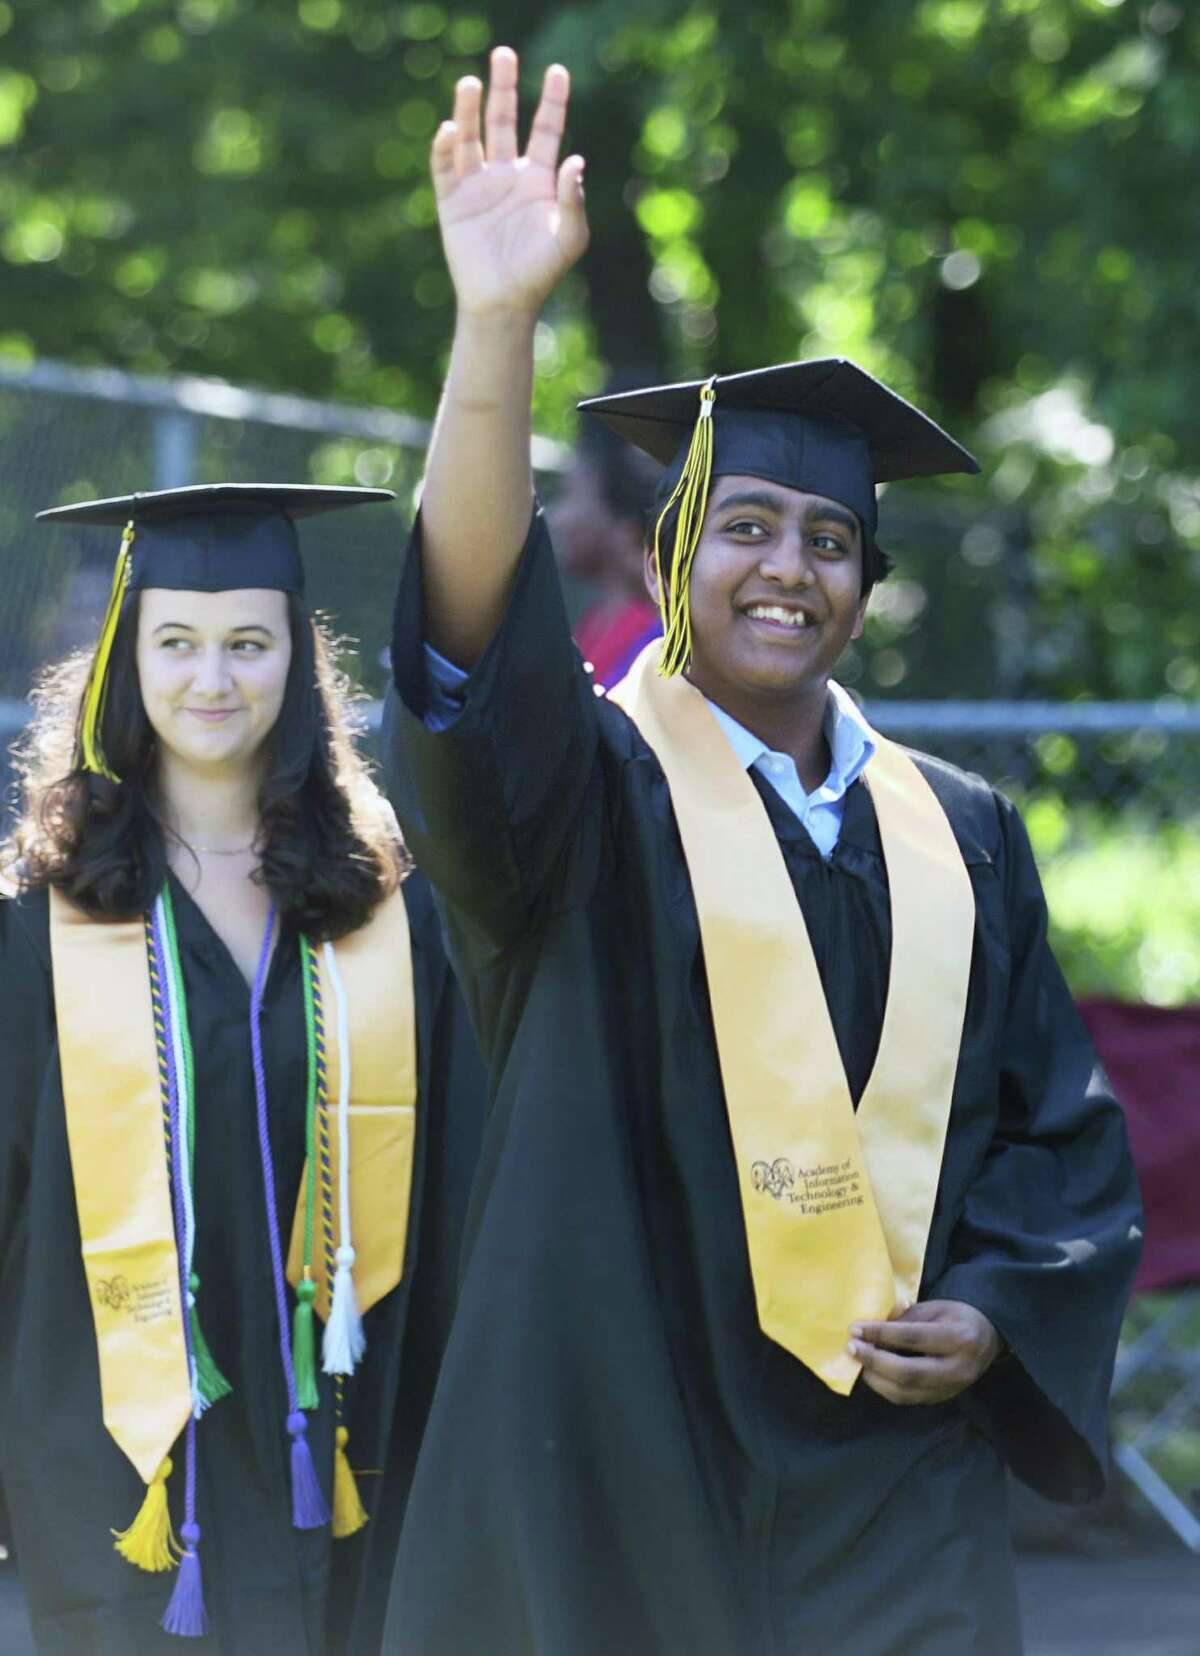 Graduating senior Devesh Singh waves to his family during the processional at the 2022 commencement ceremony at Academy of Information Technology & Engineering magnet high school in Stamford, Conn. Monday, June 20, 2022.